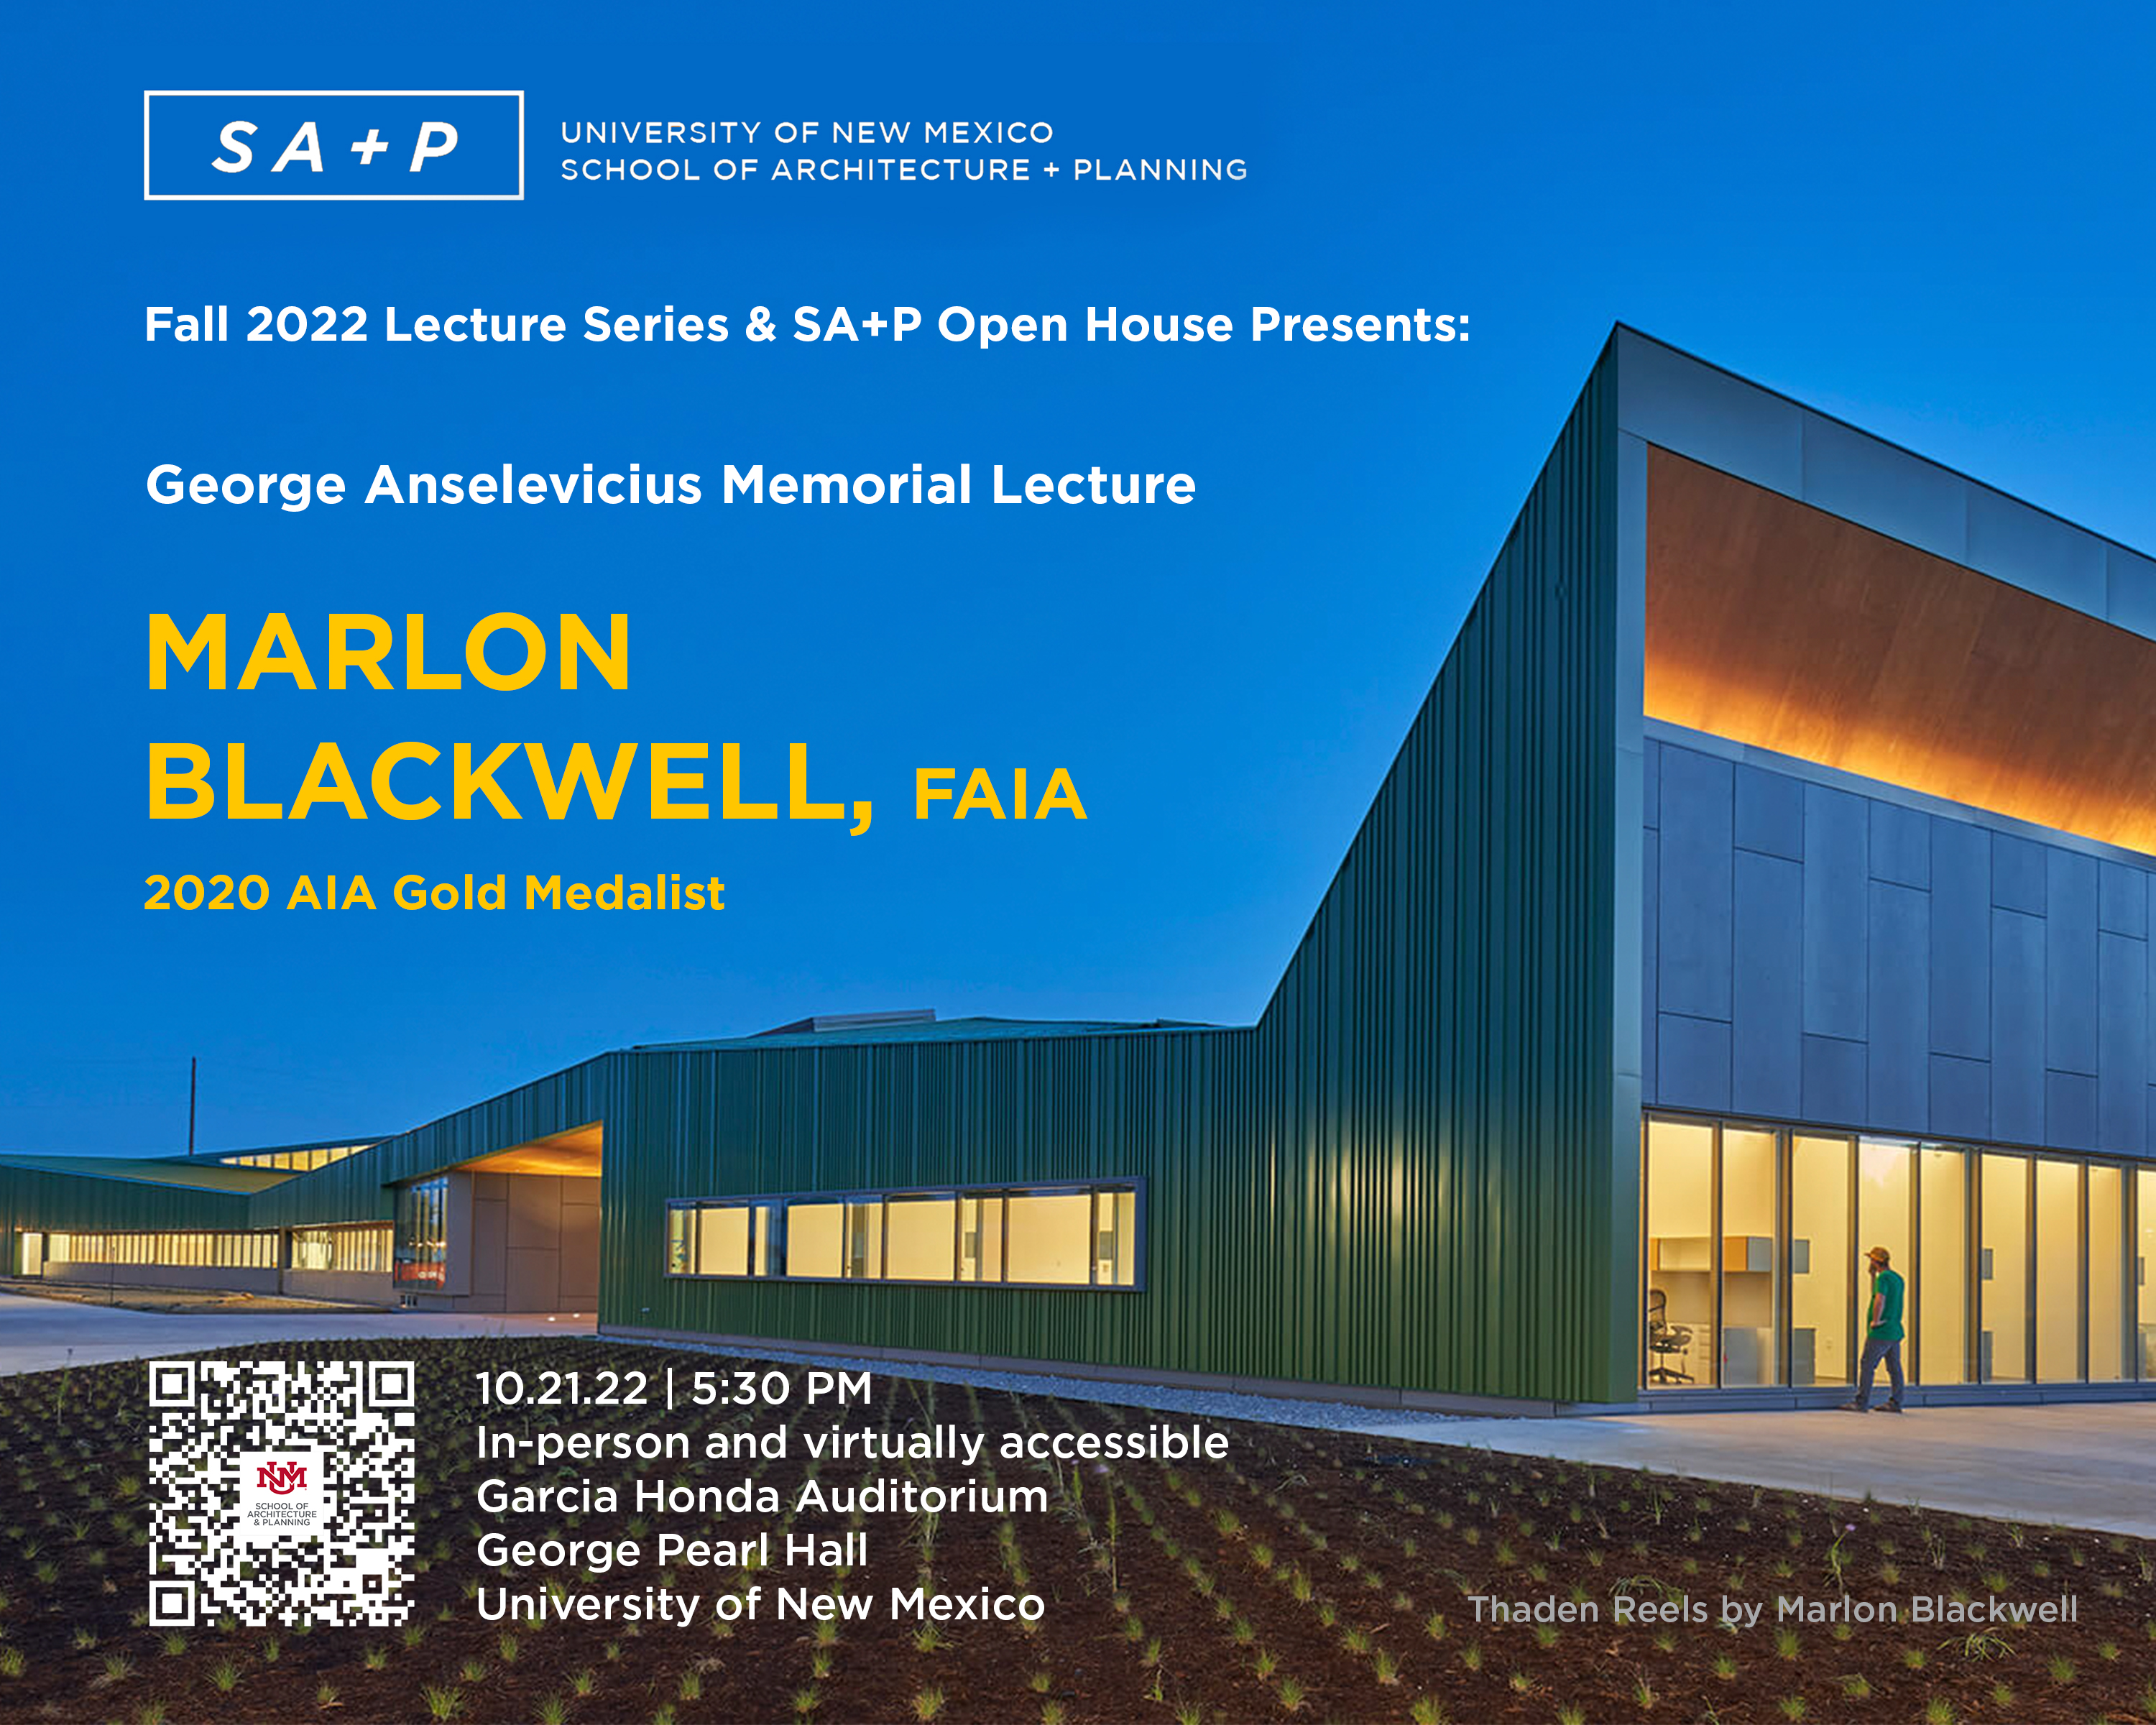 flyer with details for the marlon blackwell lecture in 2020